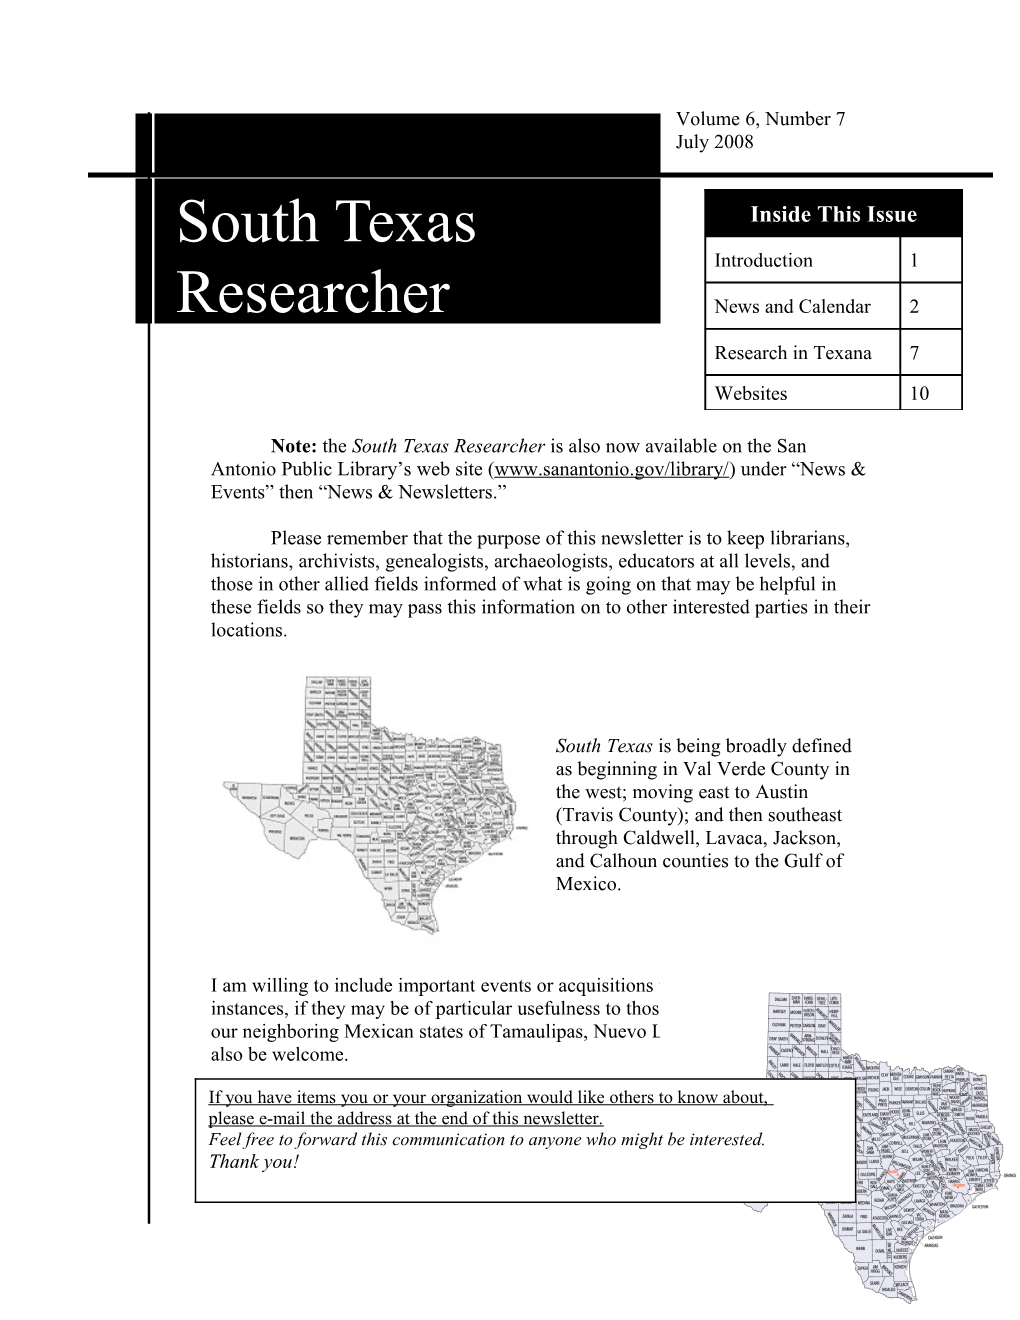 Note: the South Texas Researcher Is Also Now Available on the San Antonio Public Library